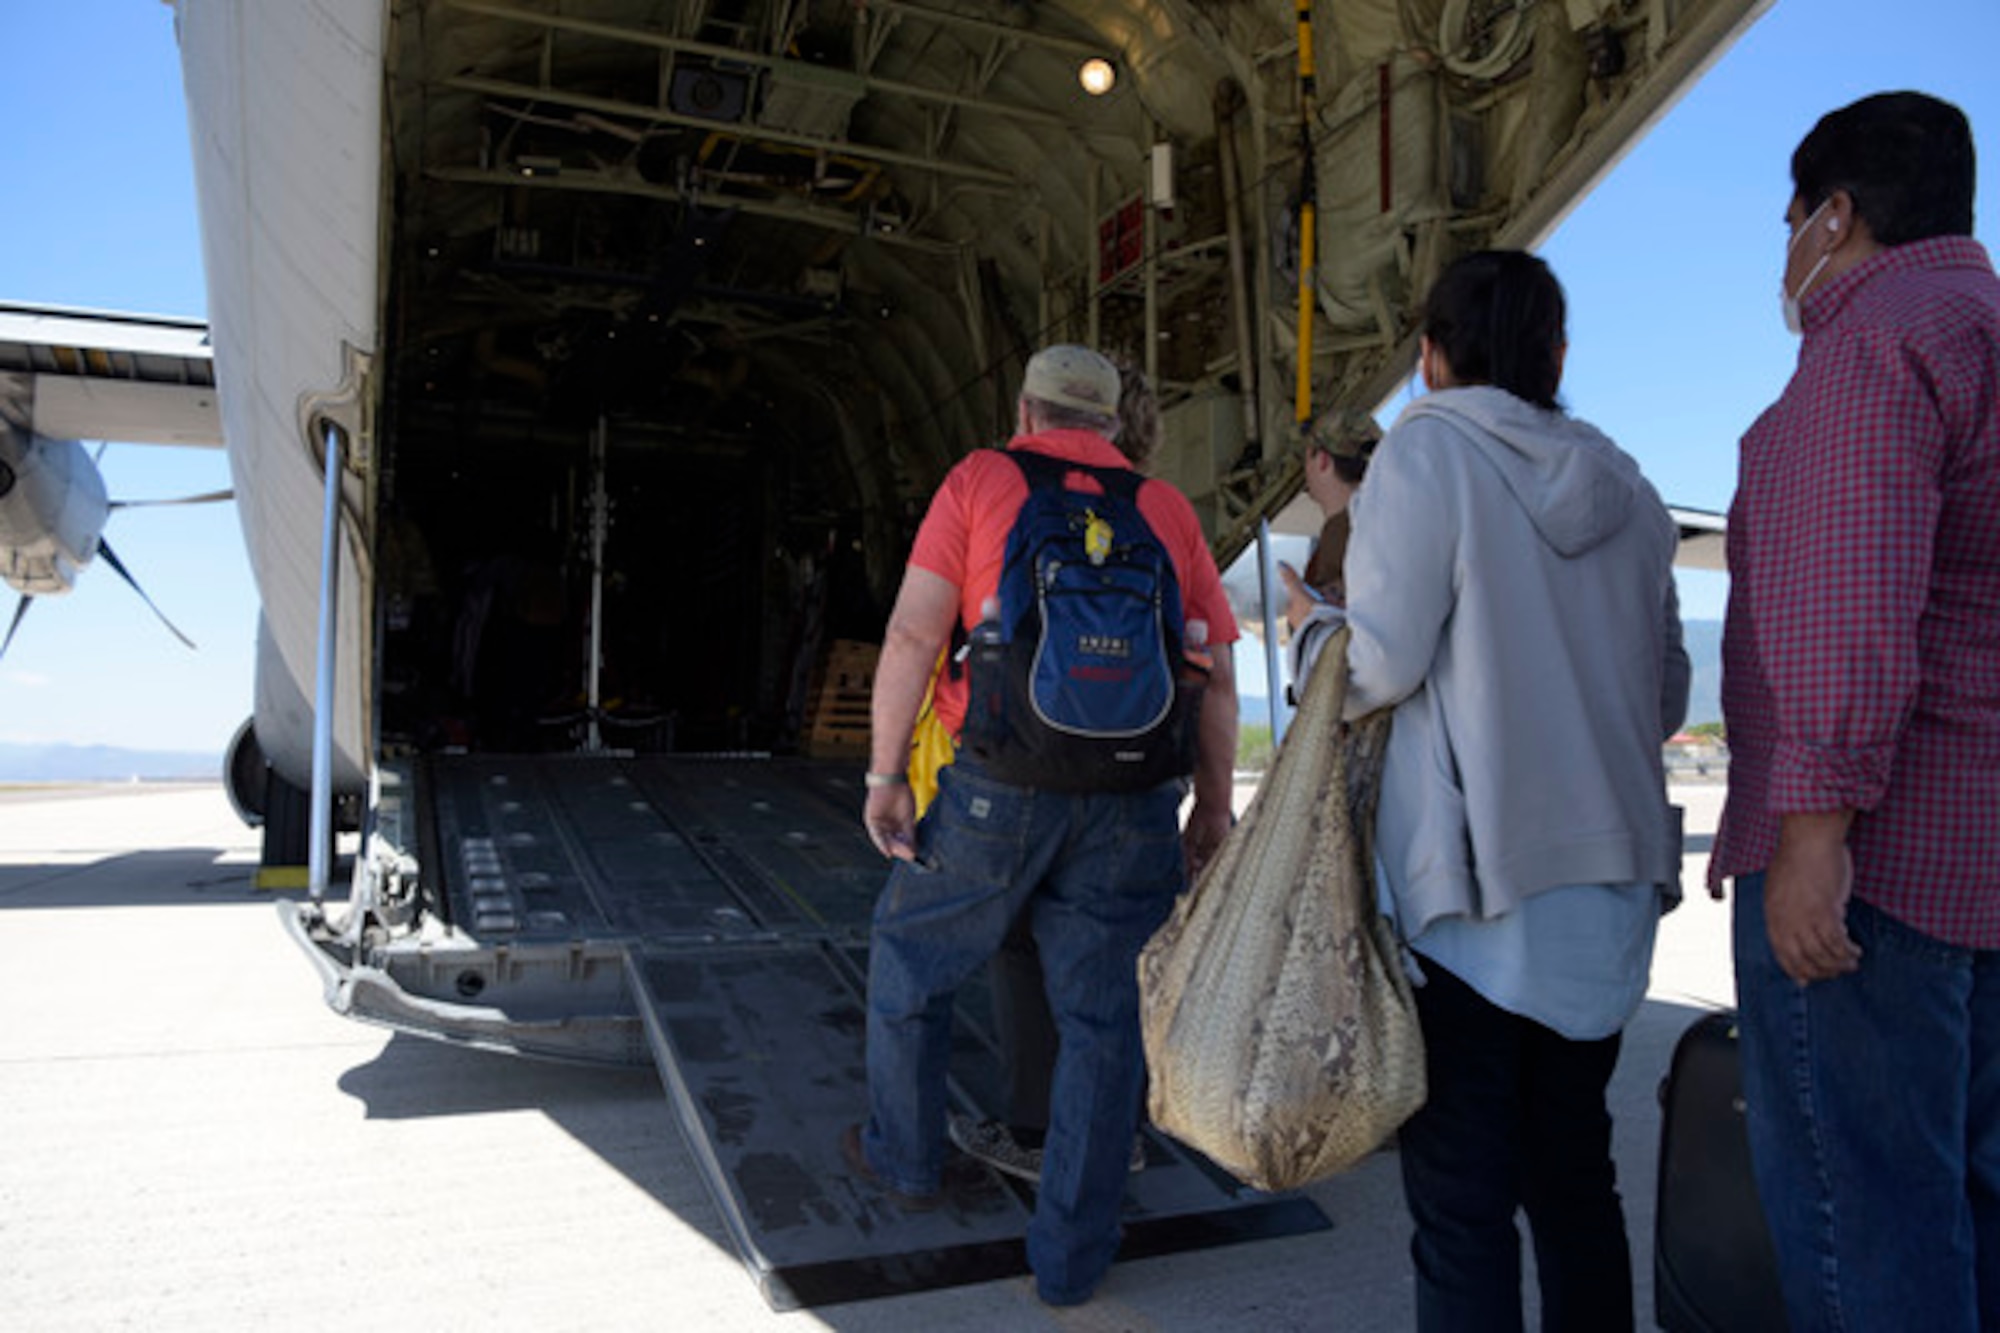 U.S. citizens board a U.S. Air Force C-130J Super Hercules at Soto Cano Air Base, Honduras, March 25, 2020. The aircraft was used to transport 78 evacuees from Honduras to Naval Air Station Norfolk, Va. The mission is part of an ongoing interagency effort led by the U.S. State Department to assist American citizens unable to return home from countries around the world during the COVID-19 pandemic. (U.S. Air Force photo by Tech. Sgt. Daniel Owen)